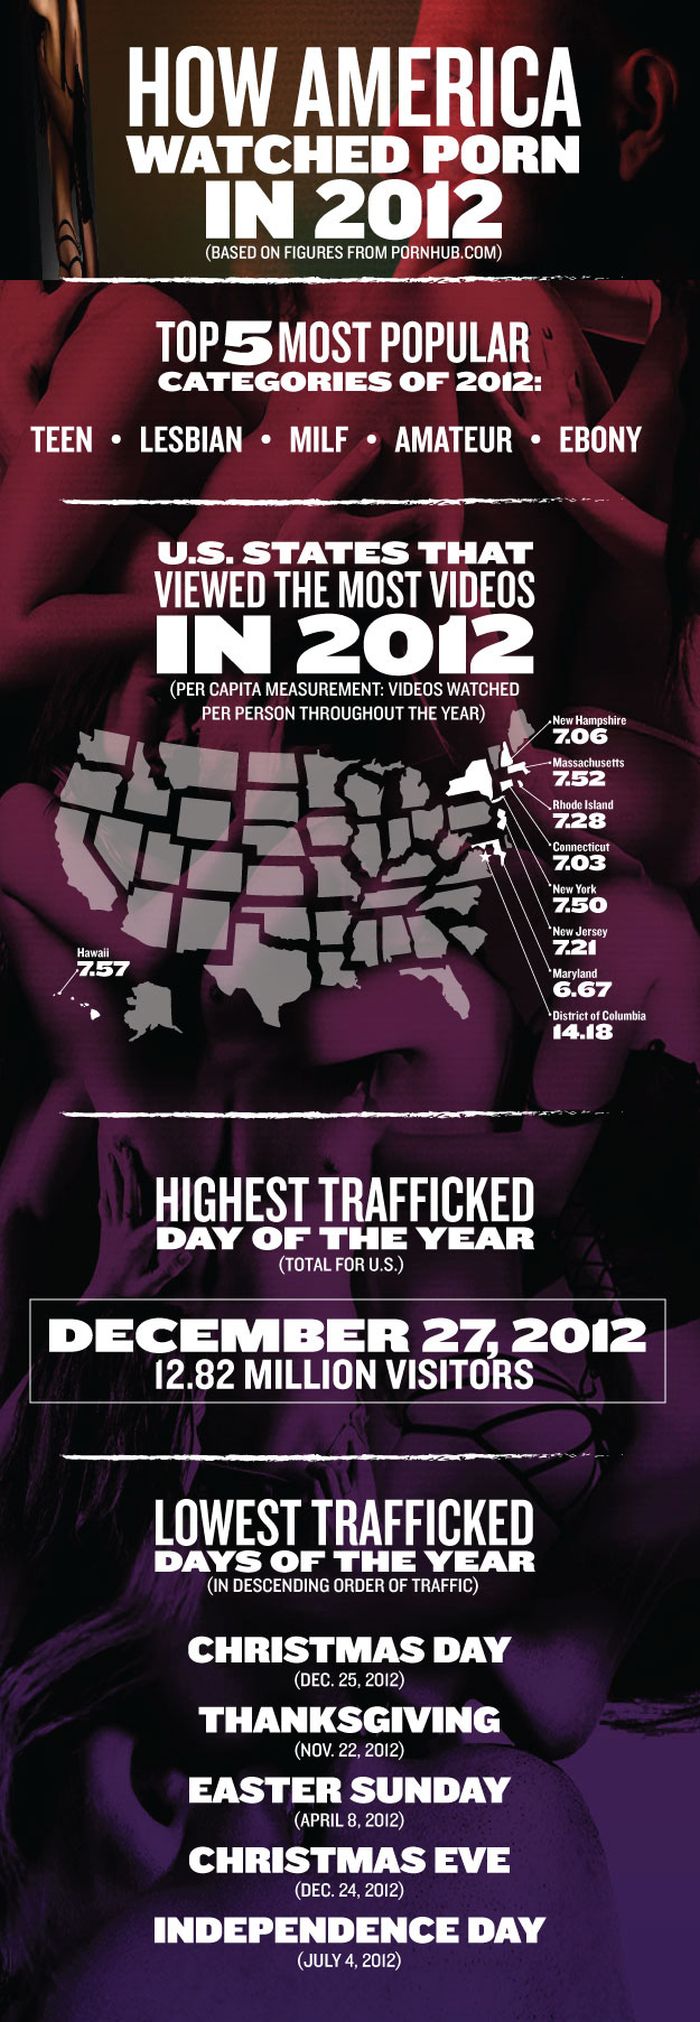 How America Watched Porn in 2012 (infographic)